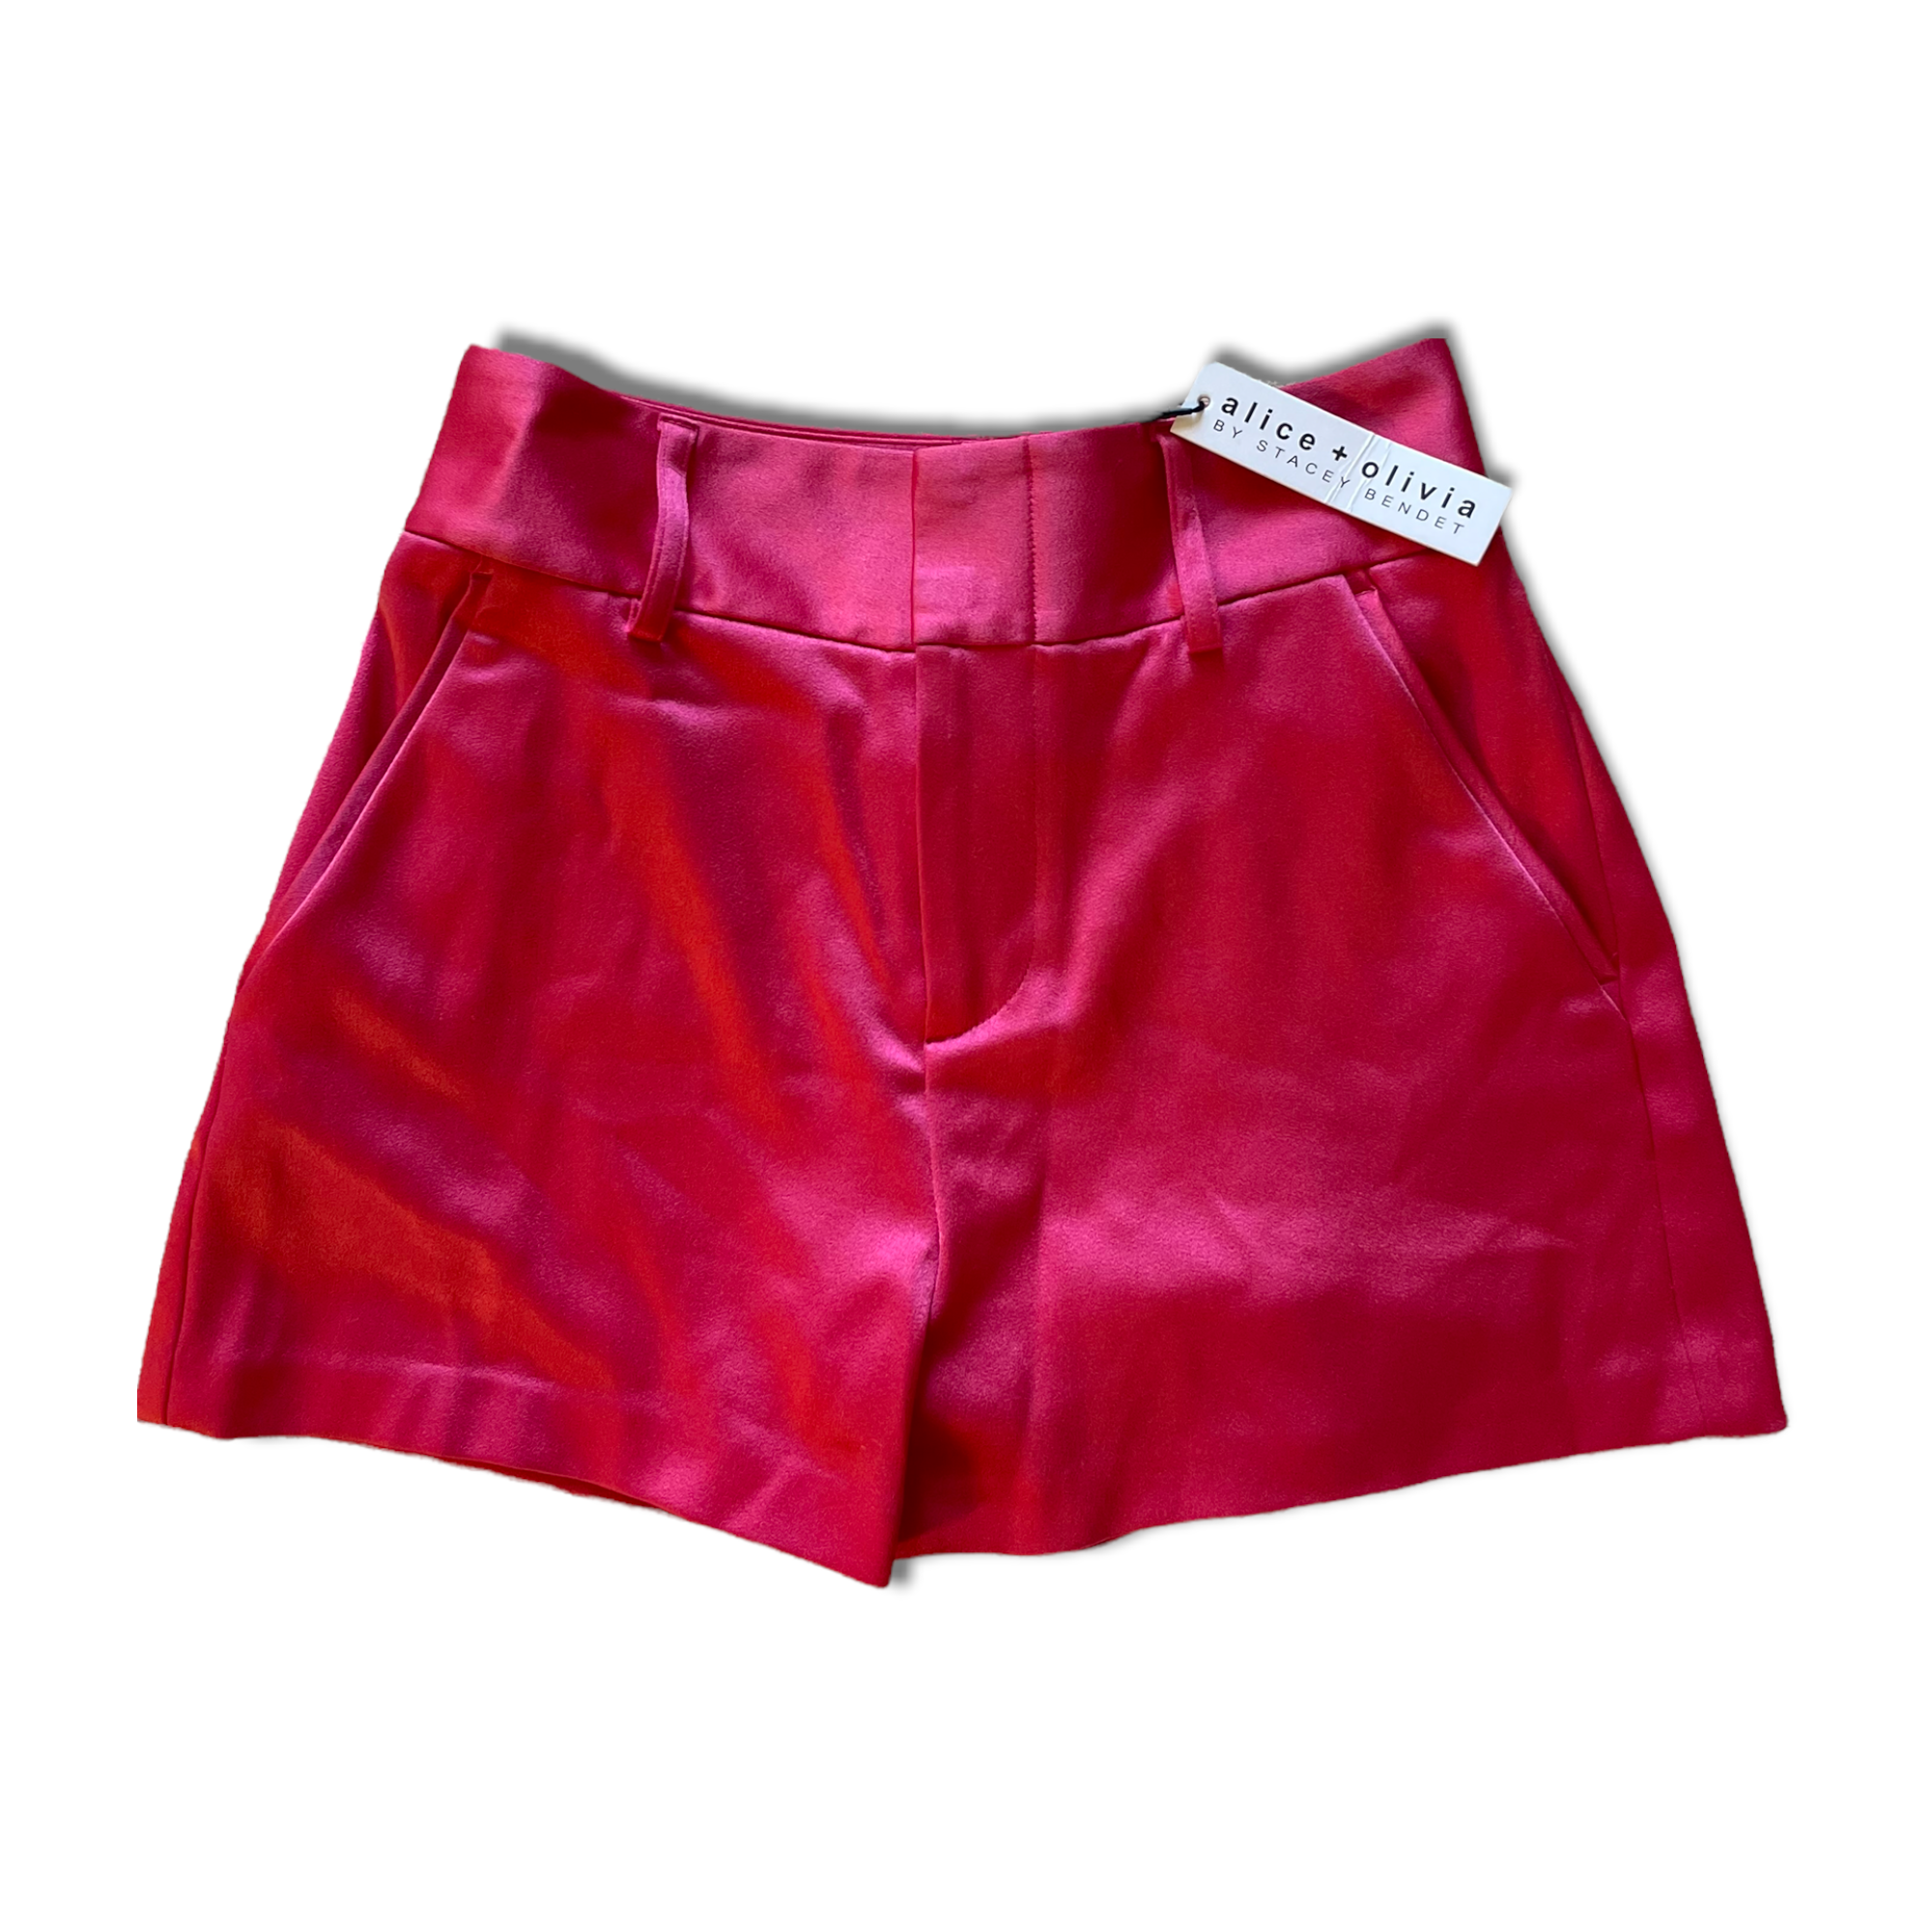 Alice + Olivia Watermelon 🍉 High-Waist & Tailored Fit Shorts |Size: 0|